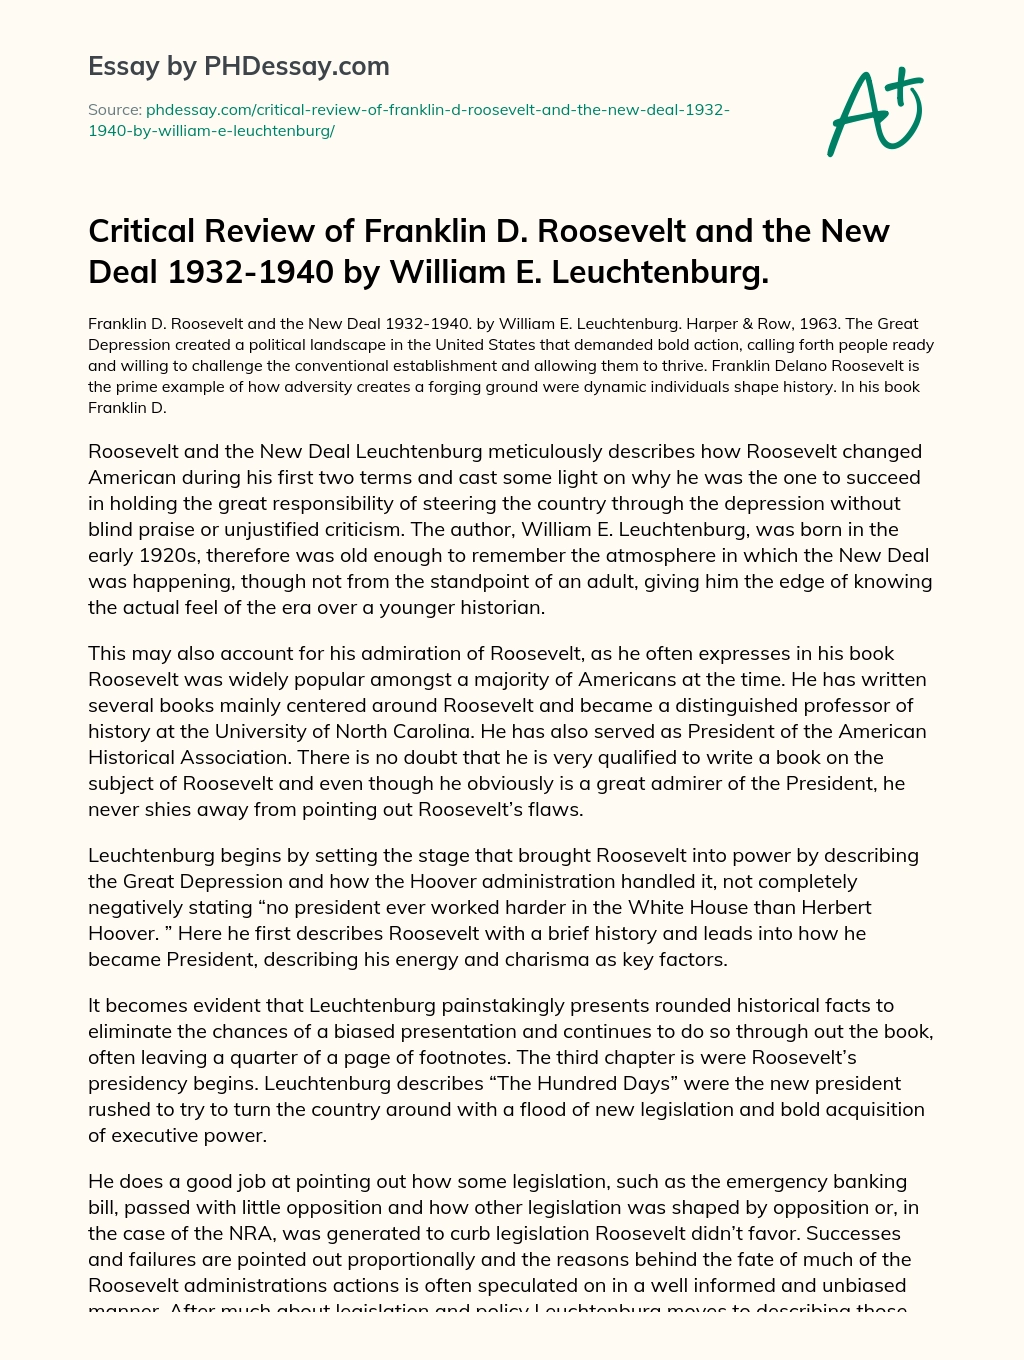 Franklin D. Roosevelt and the New Deal: A Historical Account by William E. Leuchtenburg essay